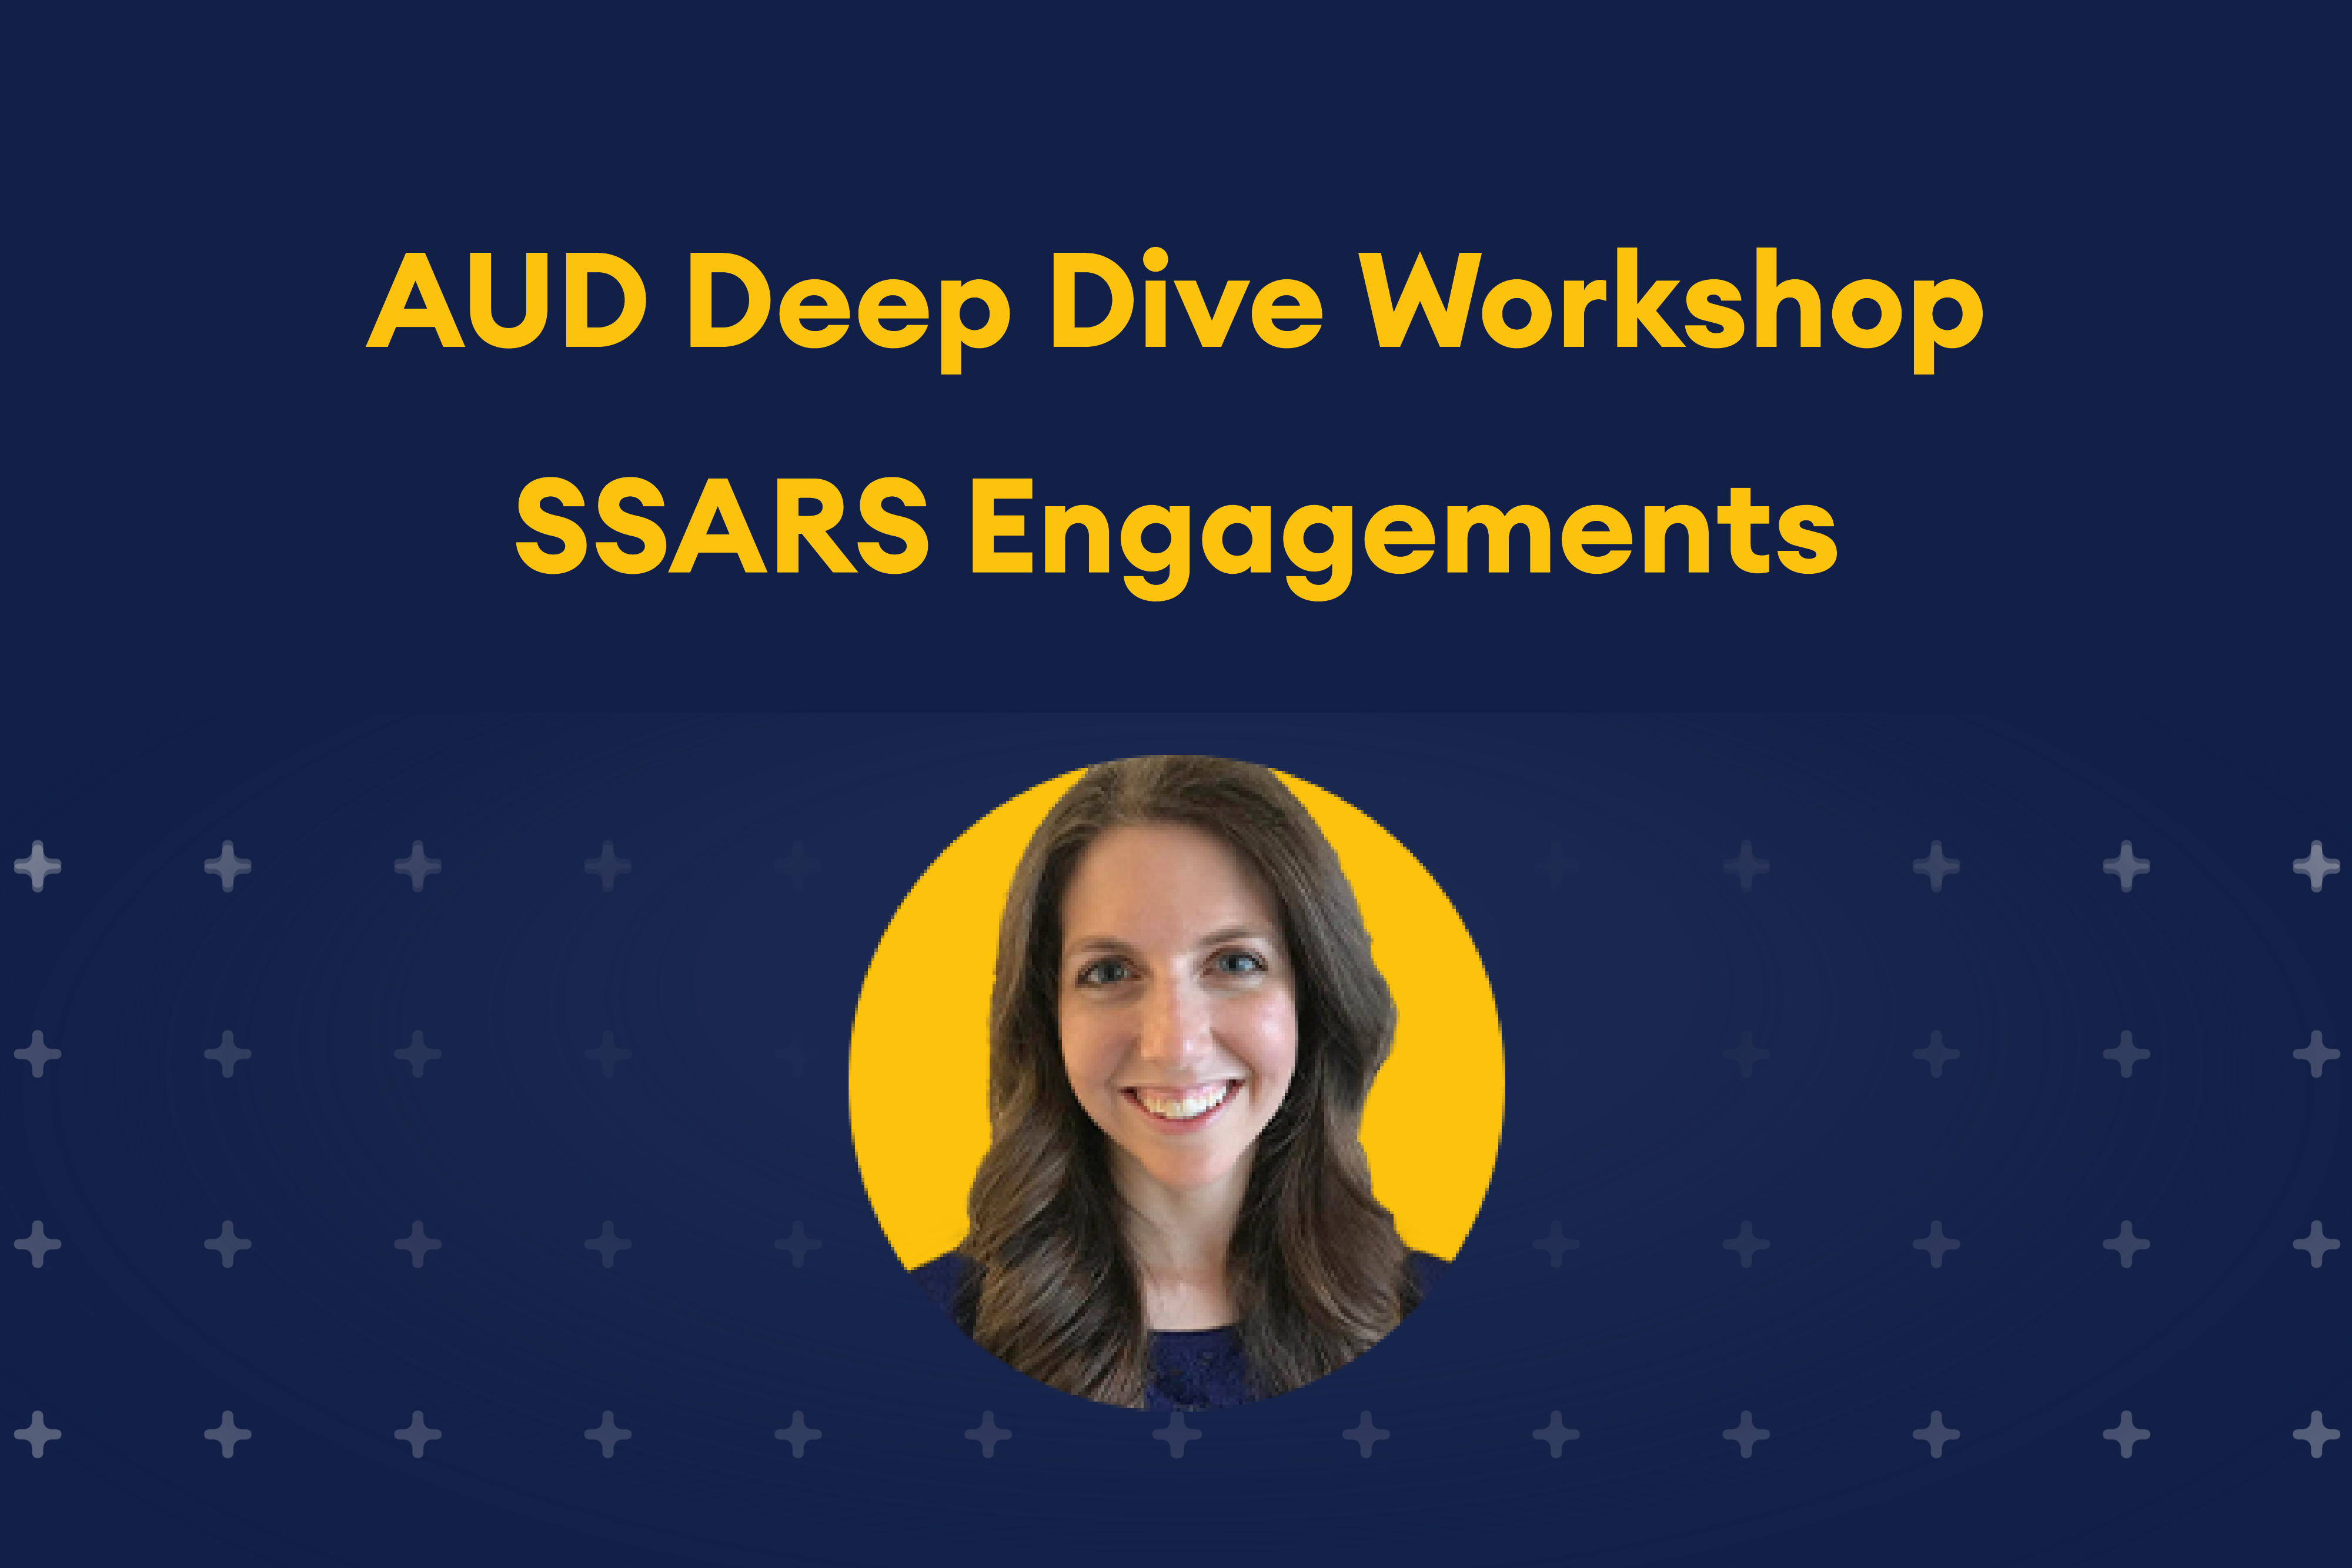 AUD Deep Dive Workshop SSARS Engagement image with instructor Michelle Moshe